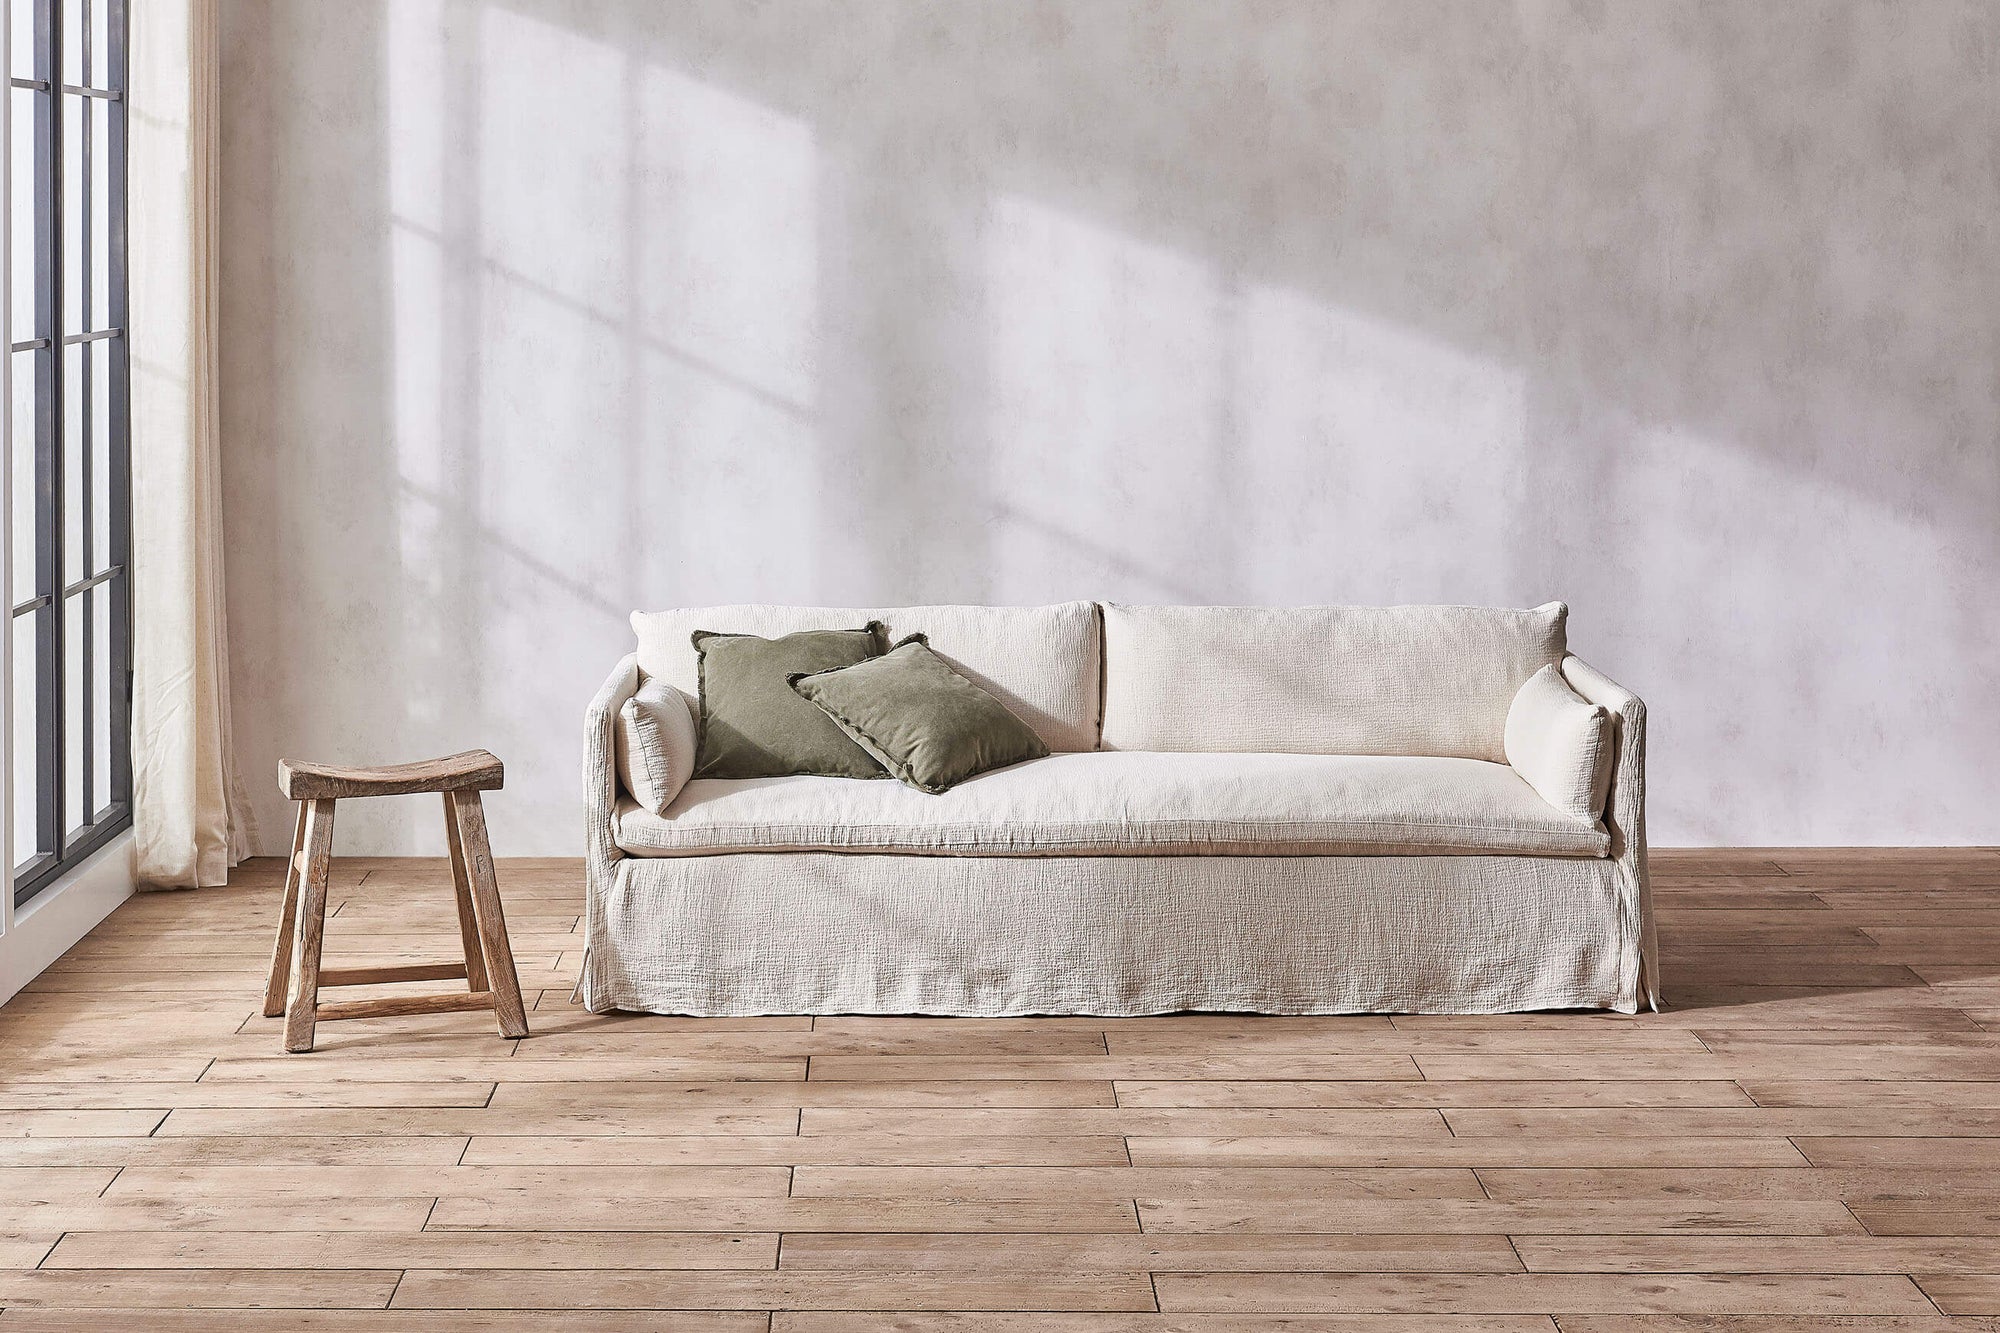 Gabriel 84" Sofa in Corn Silk, a light beige Washed Cotton Linen, placed in a sunlit room beside a stool